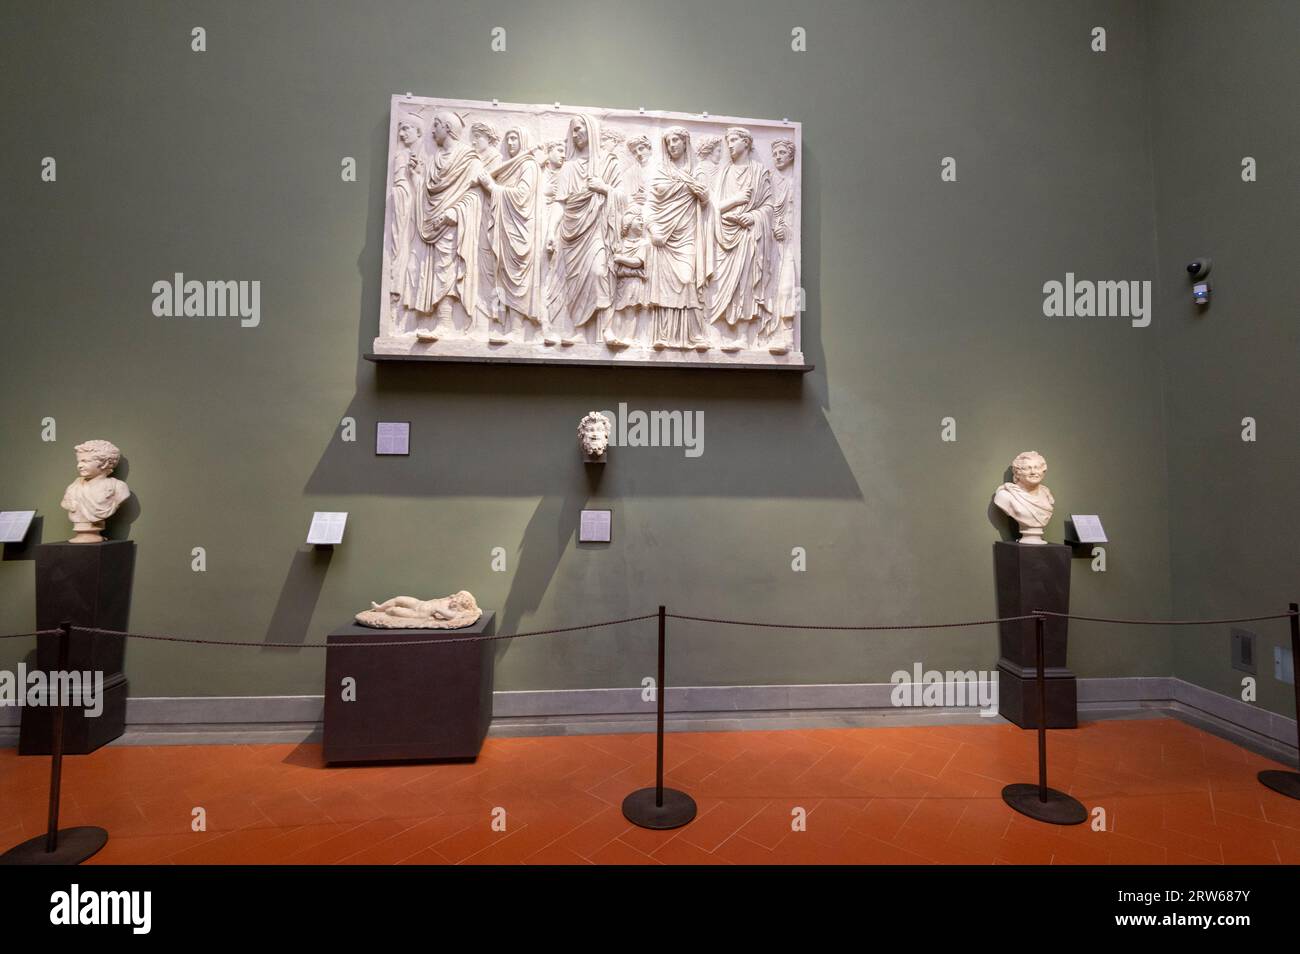 A Room of Roman Art  -  The large hanging casting is of the Relief of the Ara Pacis Augustae with Procession, on display in the room of Roman Art at t Stock Photo